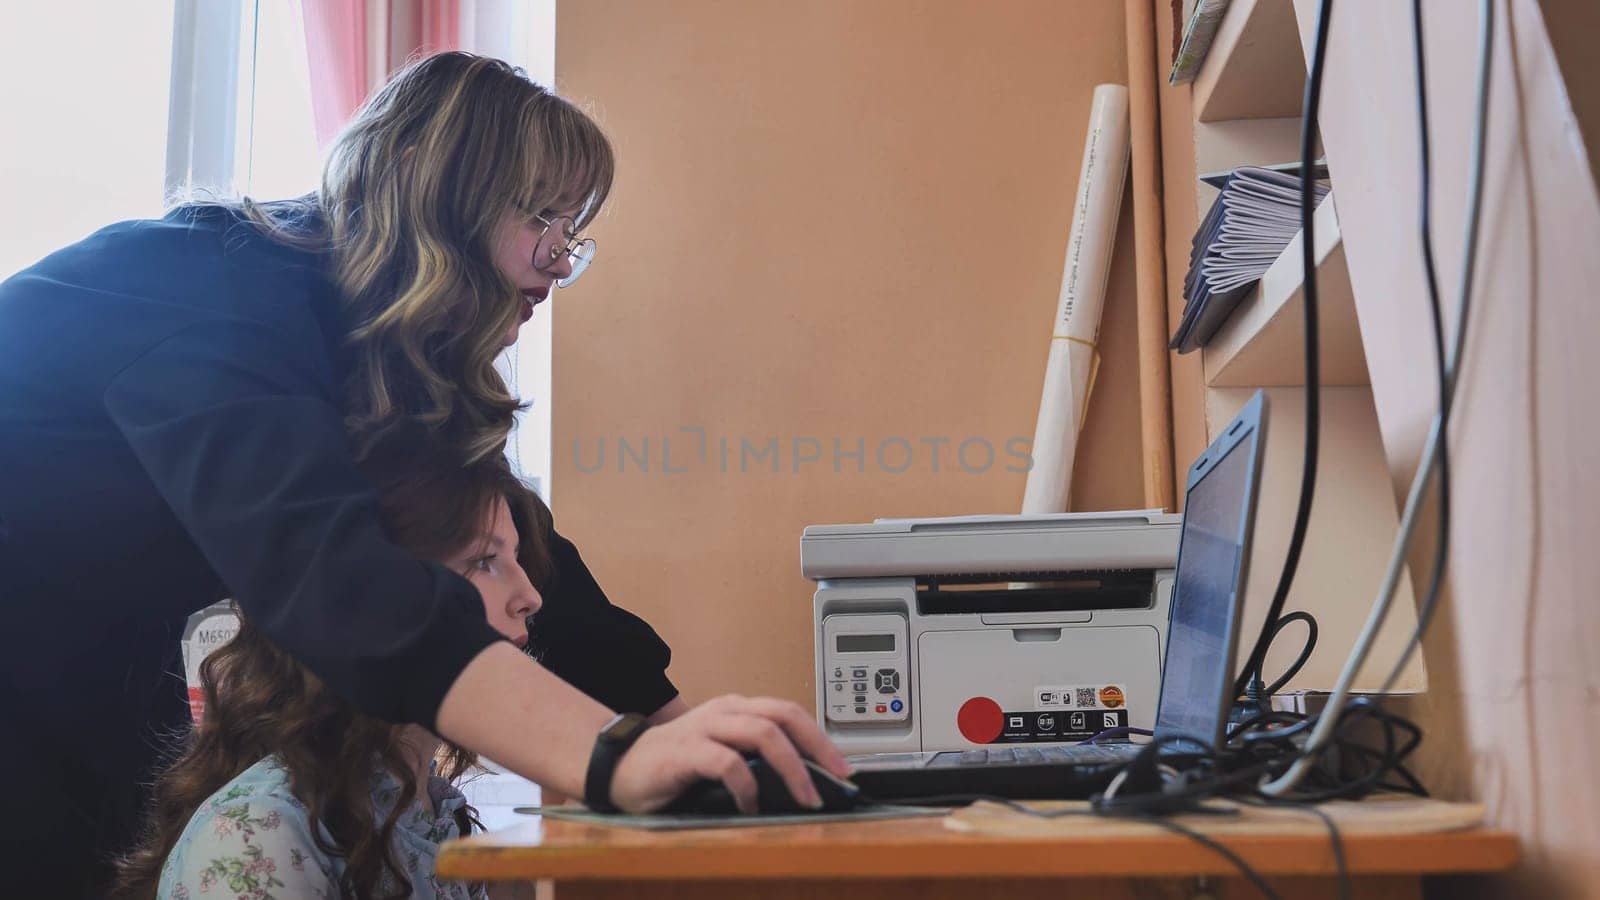 Two female students are working at a computer in a classroom at school